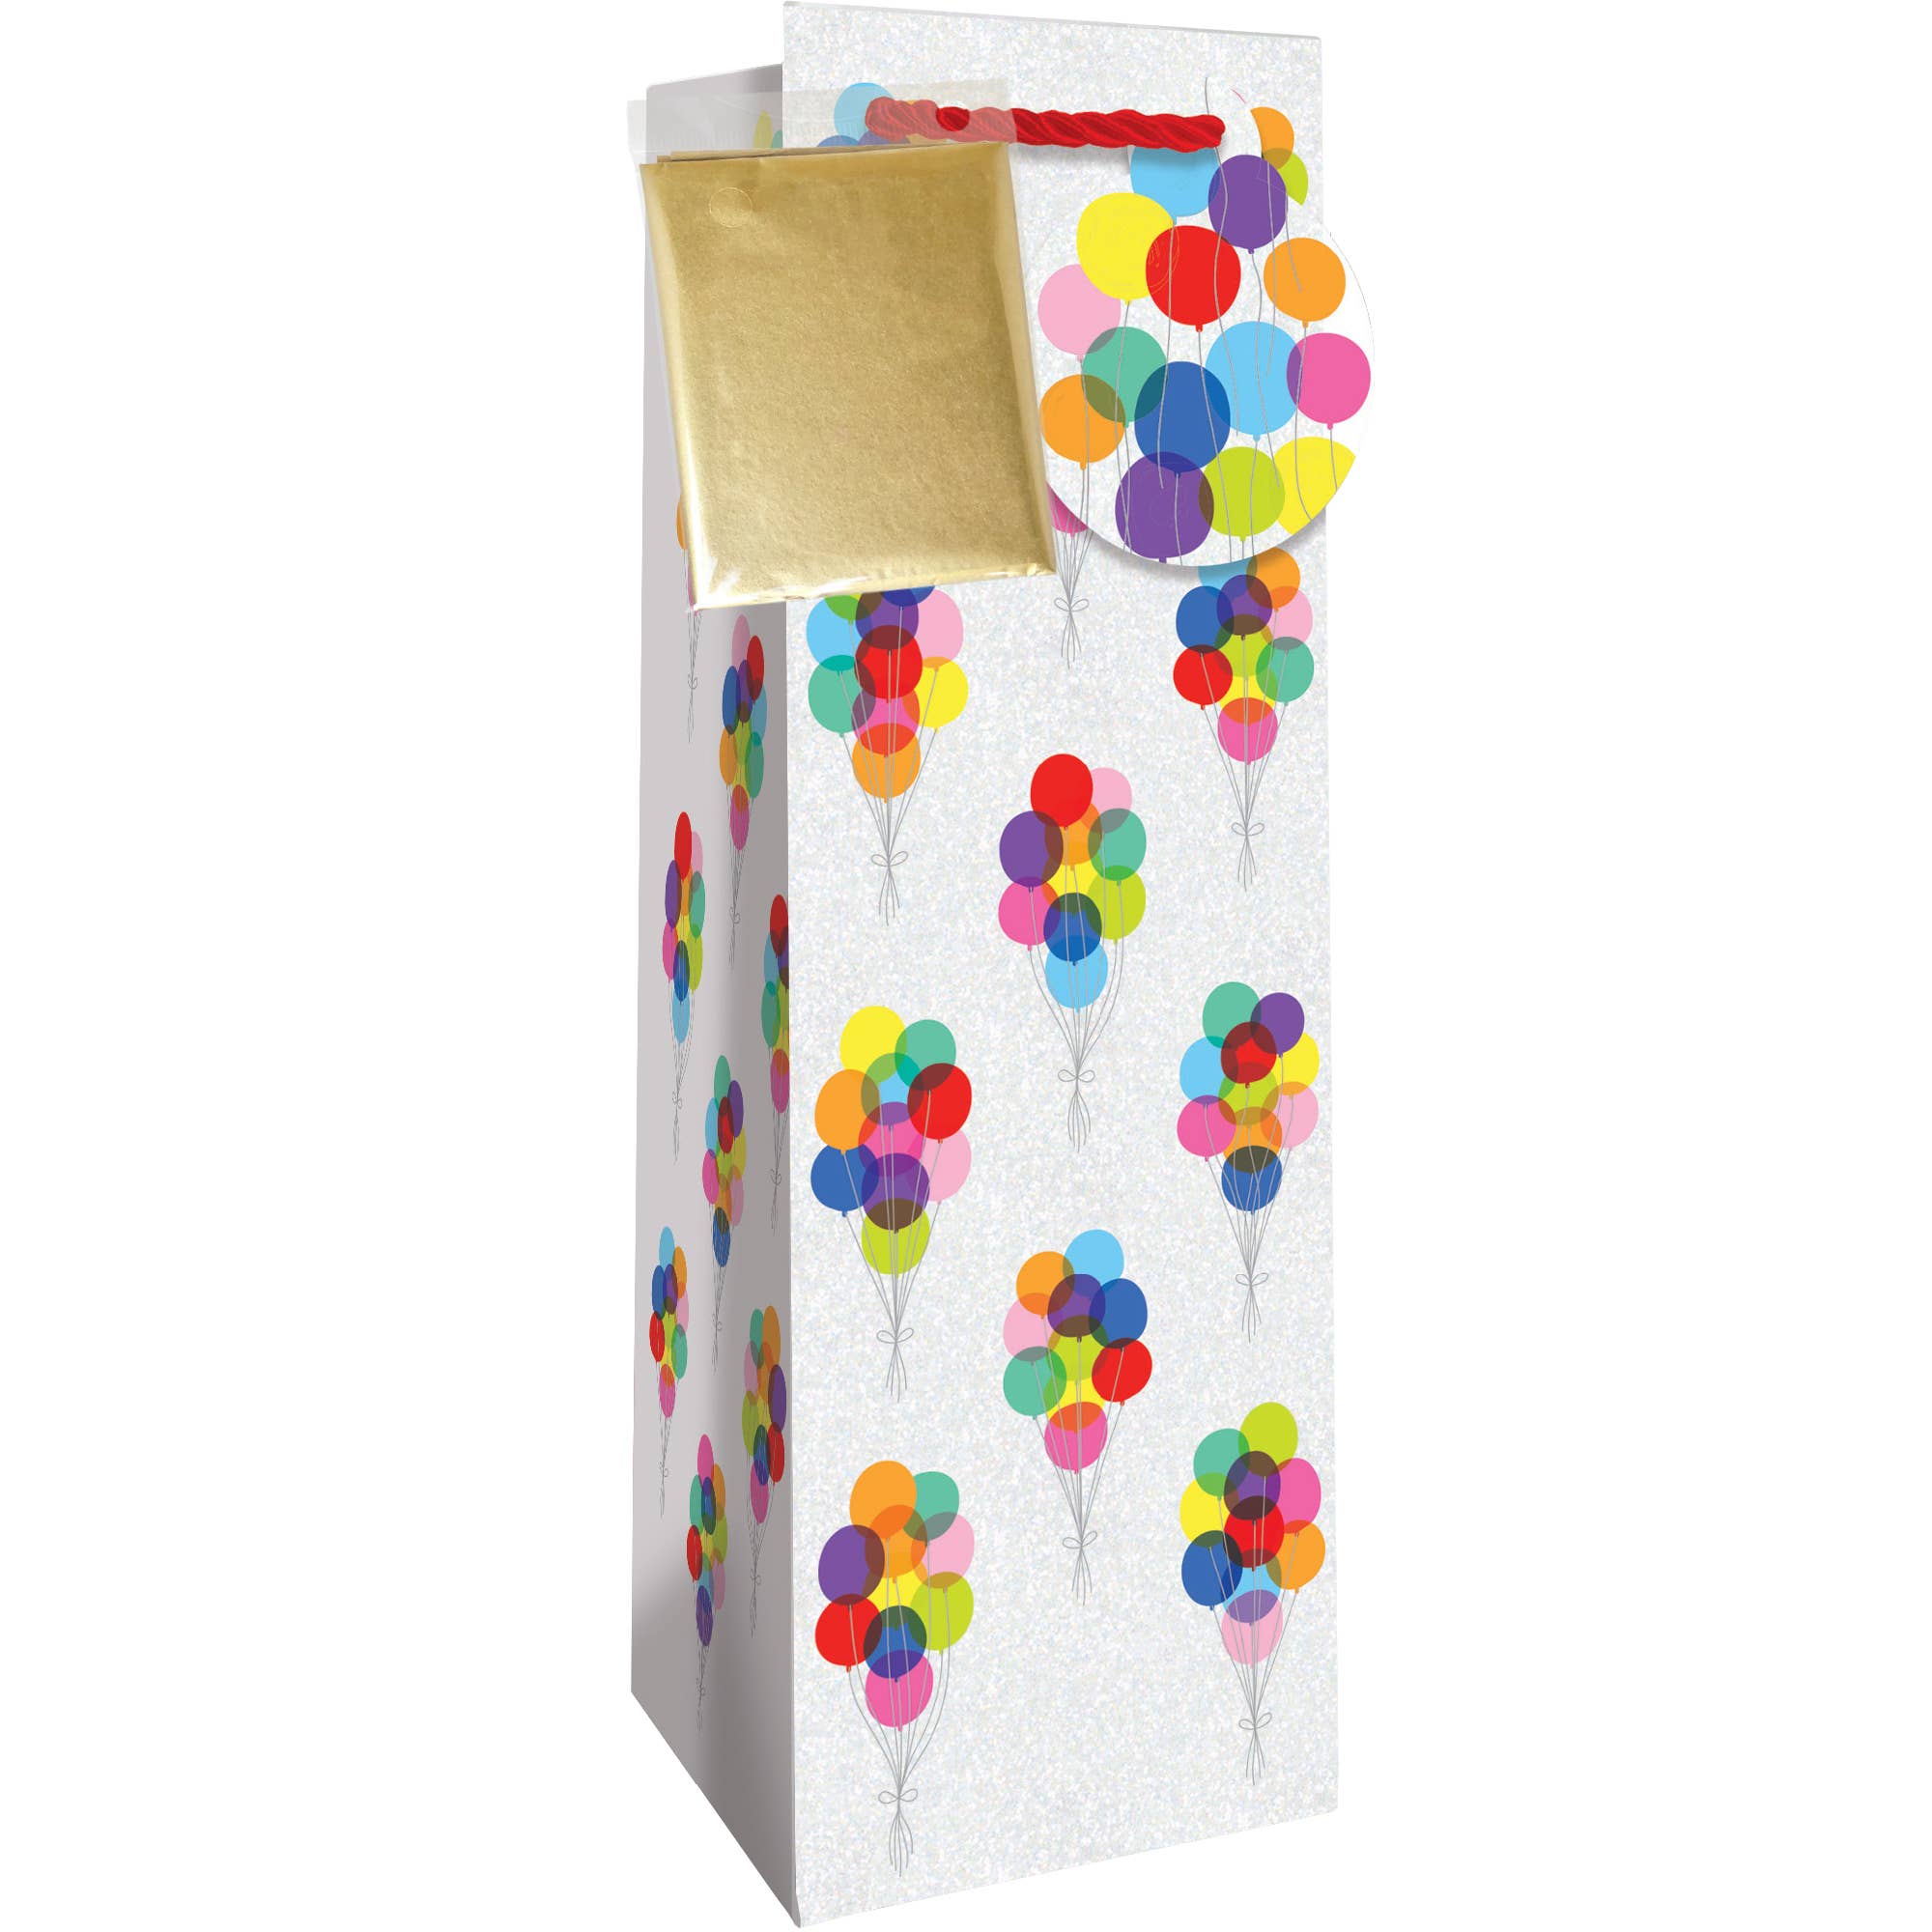 Totes w/ Tissue - Bottle - Bunch of Balloons